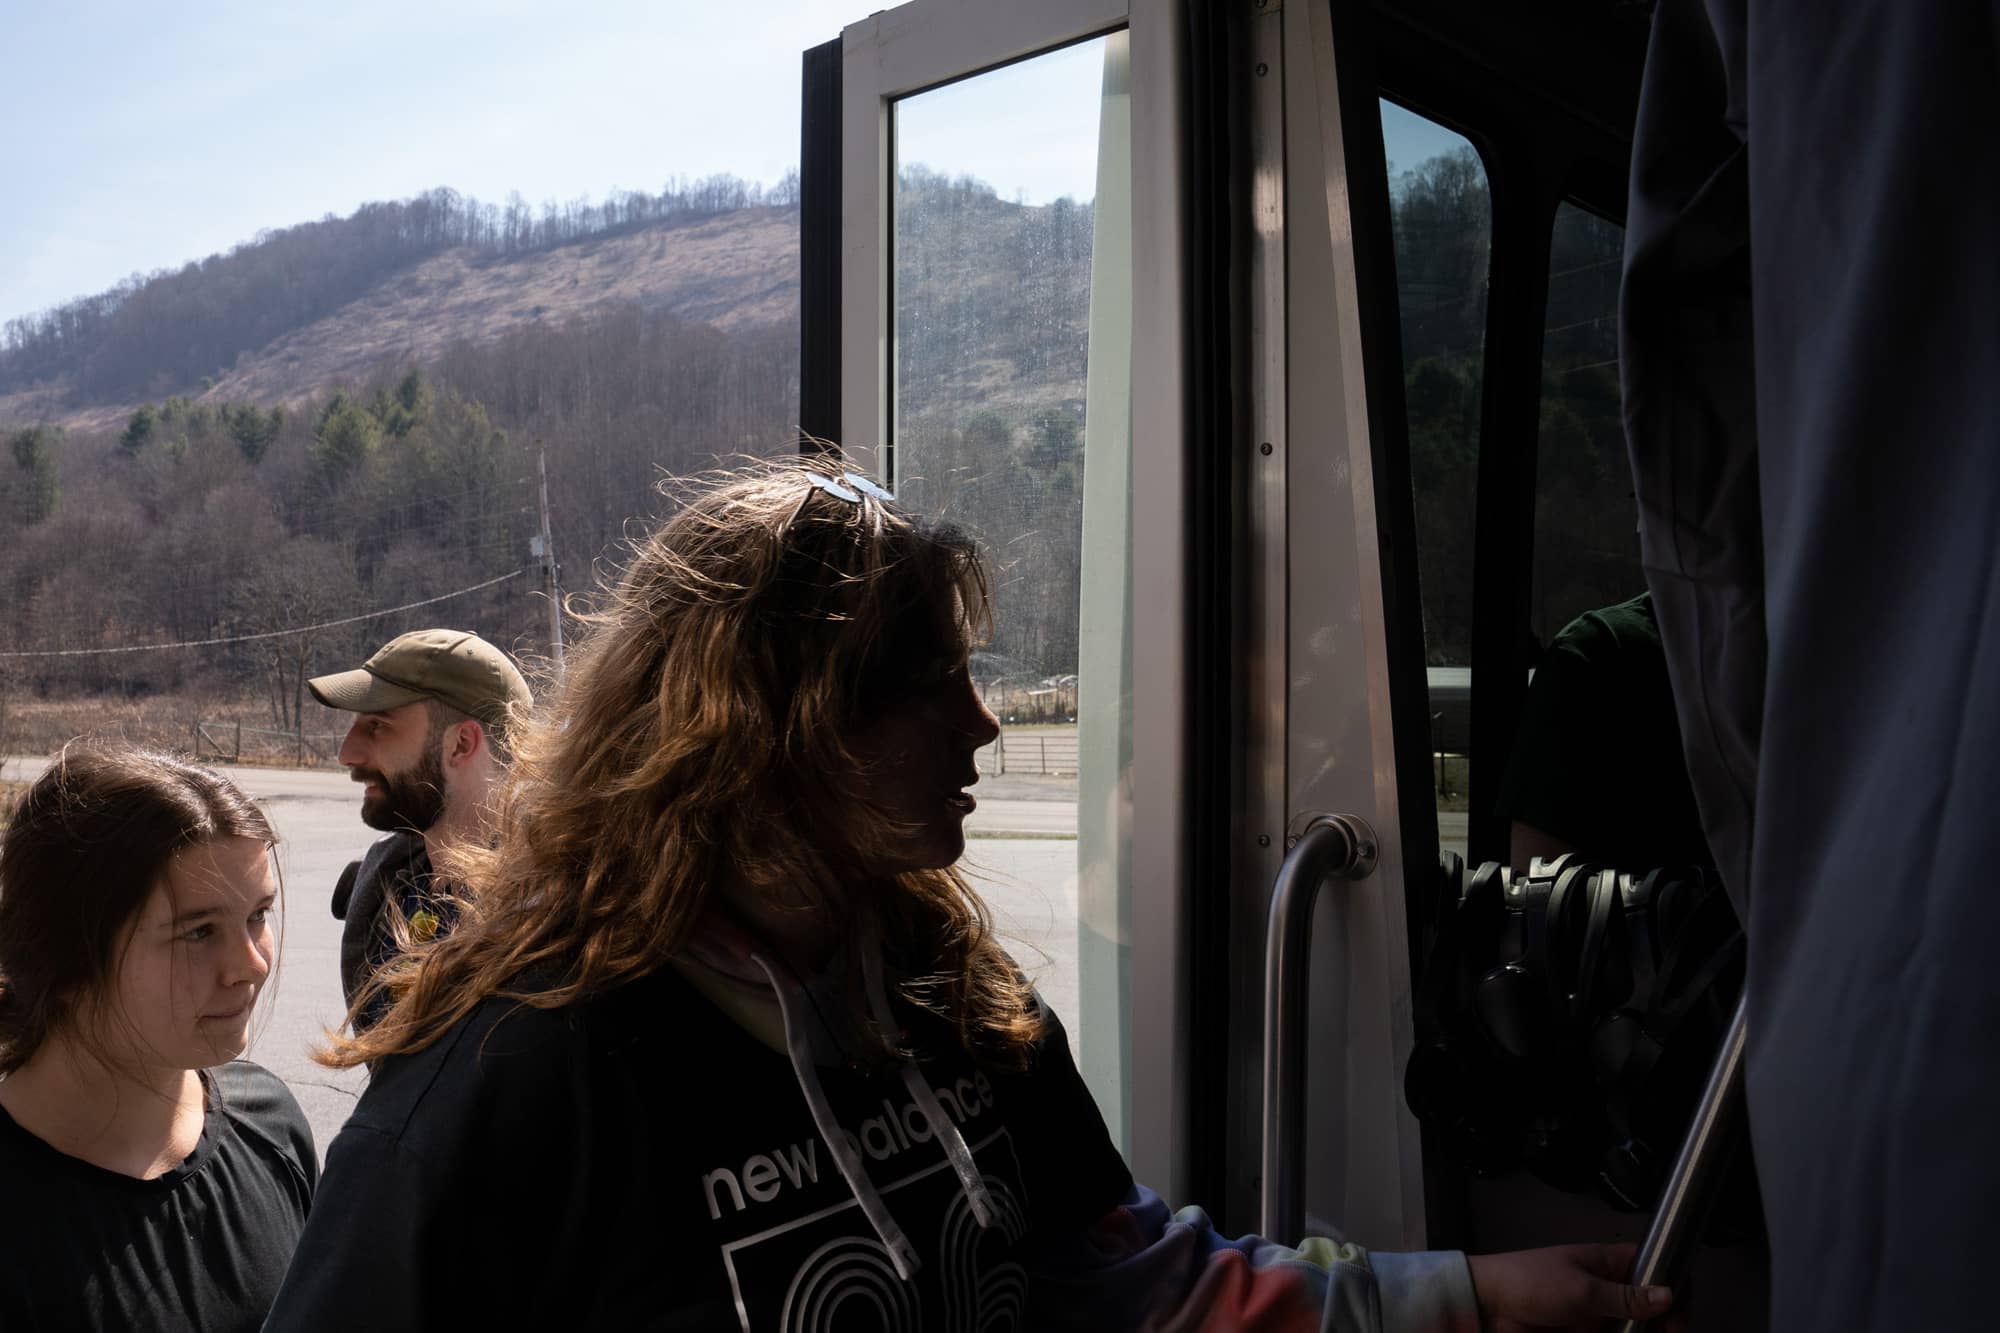 Helena Karlstrom, Riley Long and Eamonn Bell get on the bus after the last gas stop before arriving to backpack a section of the Appalachian Trail in the Nantahala National Forest on Saturday, March 5, 2022, in North Carolina.